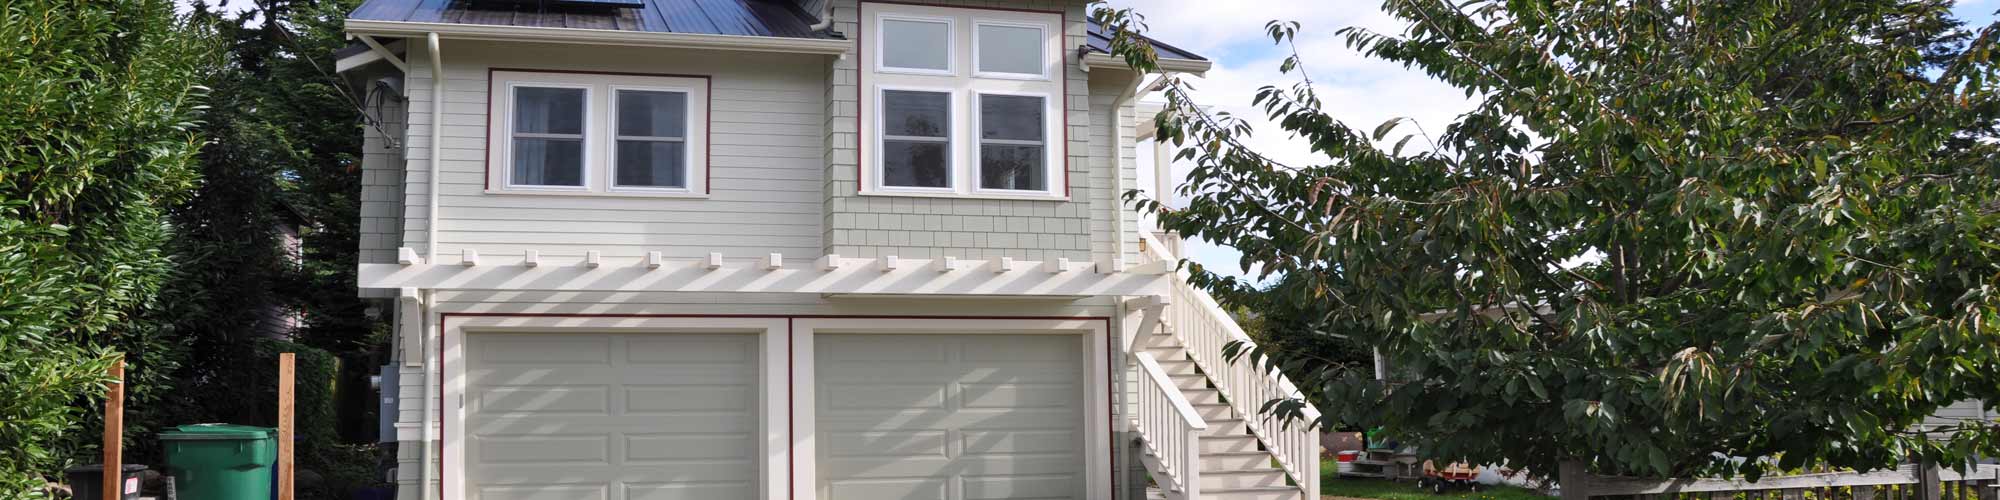 Freeman Exterior Residential and Commercial Painting Services Seattle